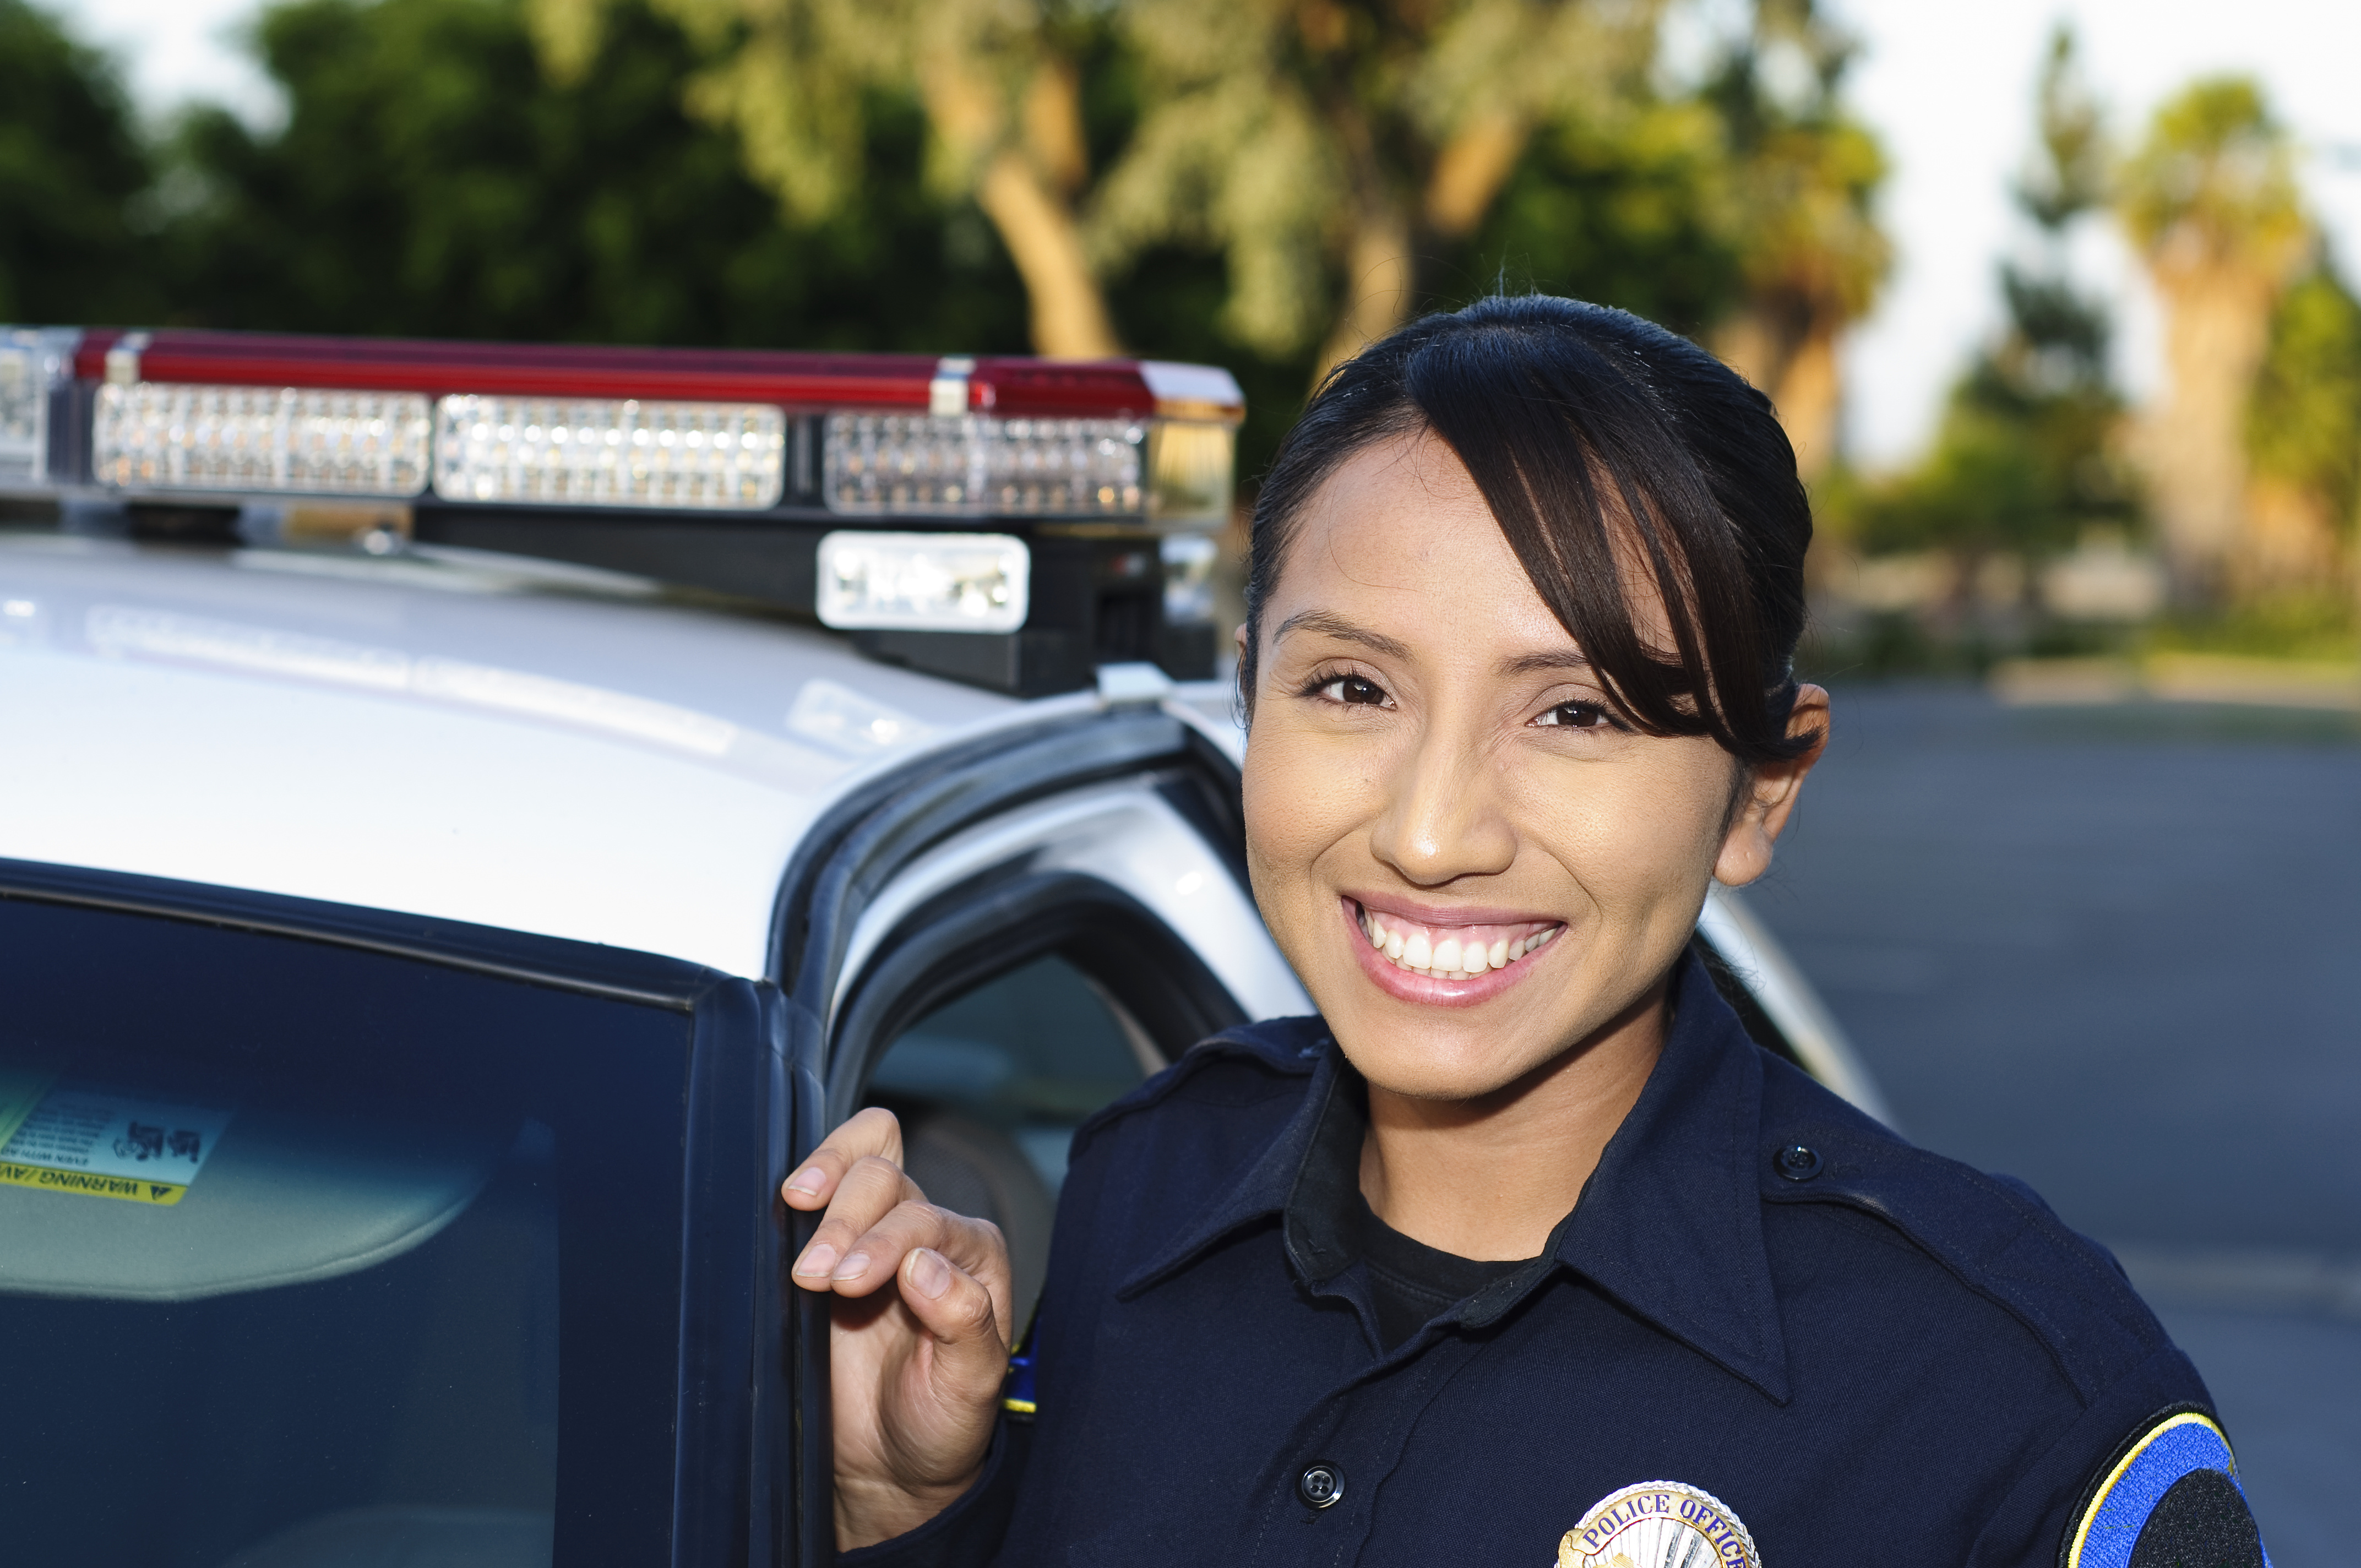 Police Officer Benefits: A Summary